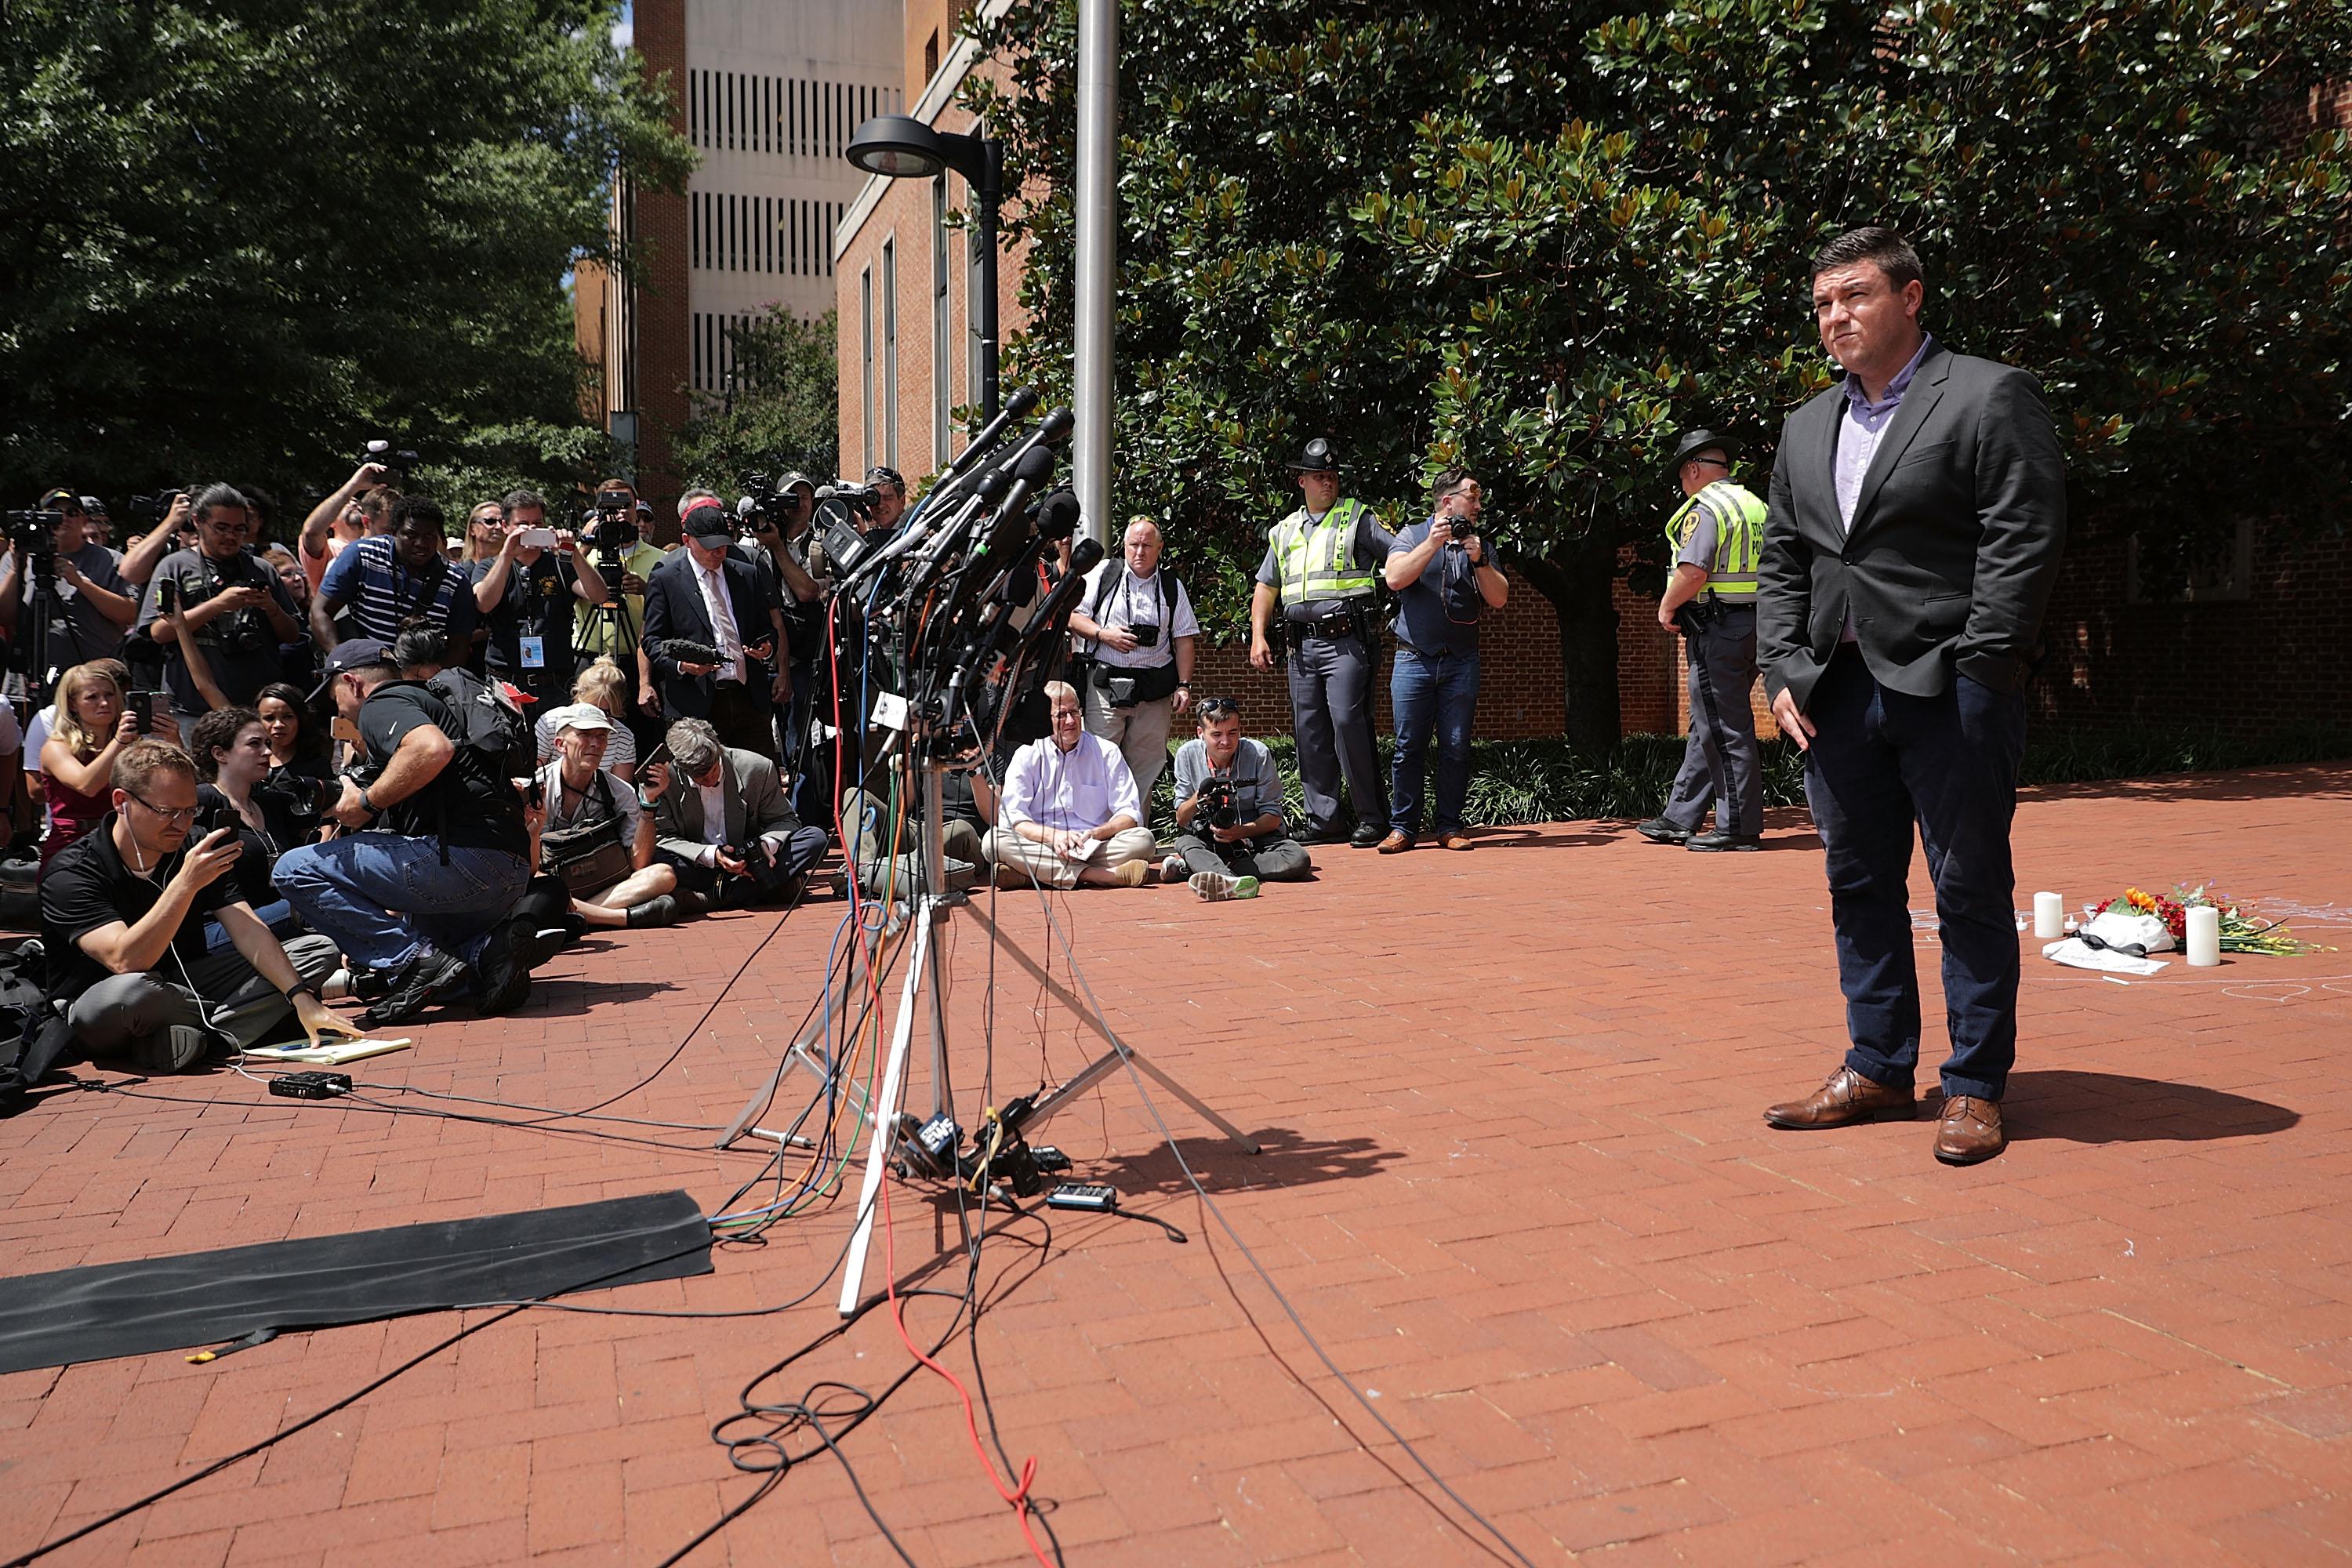 Jason Kessler stands in front of a crowd at a news conference.